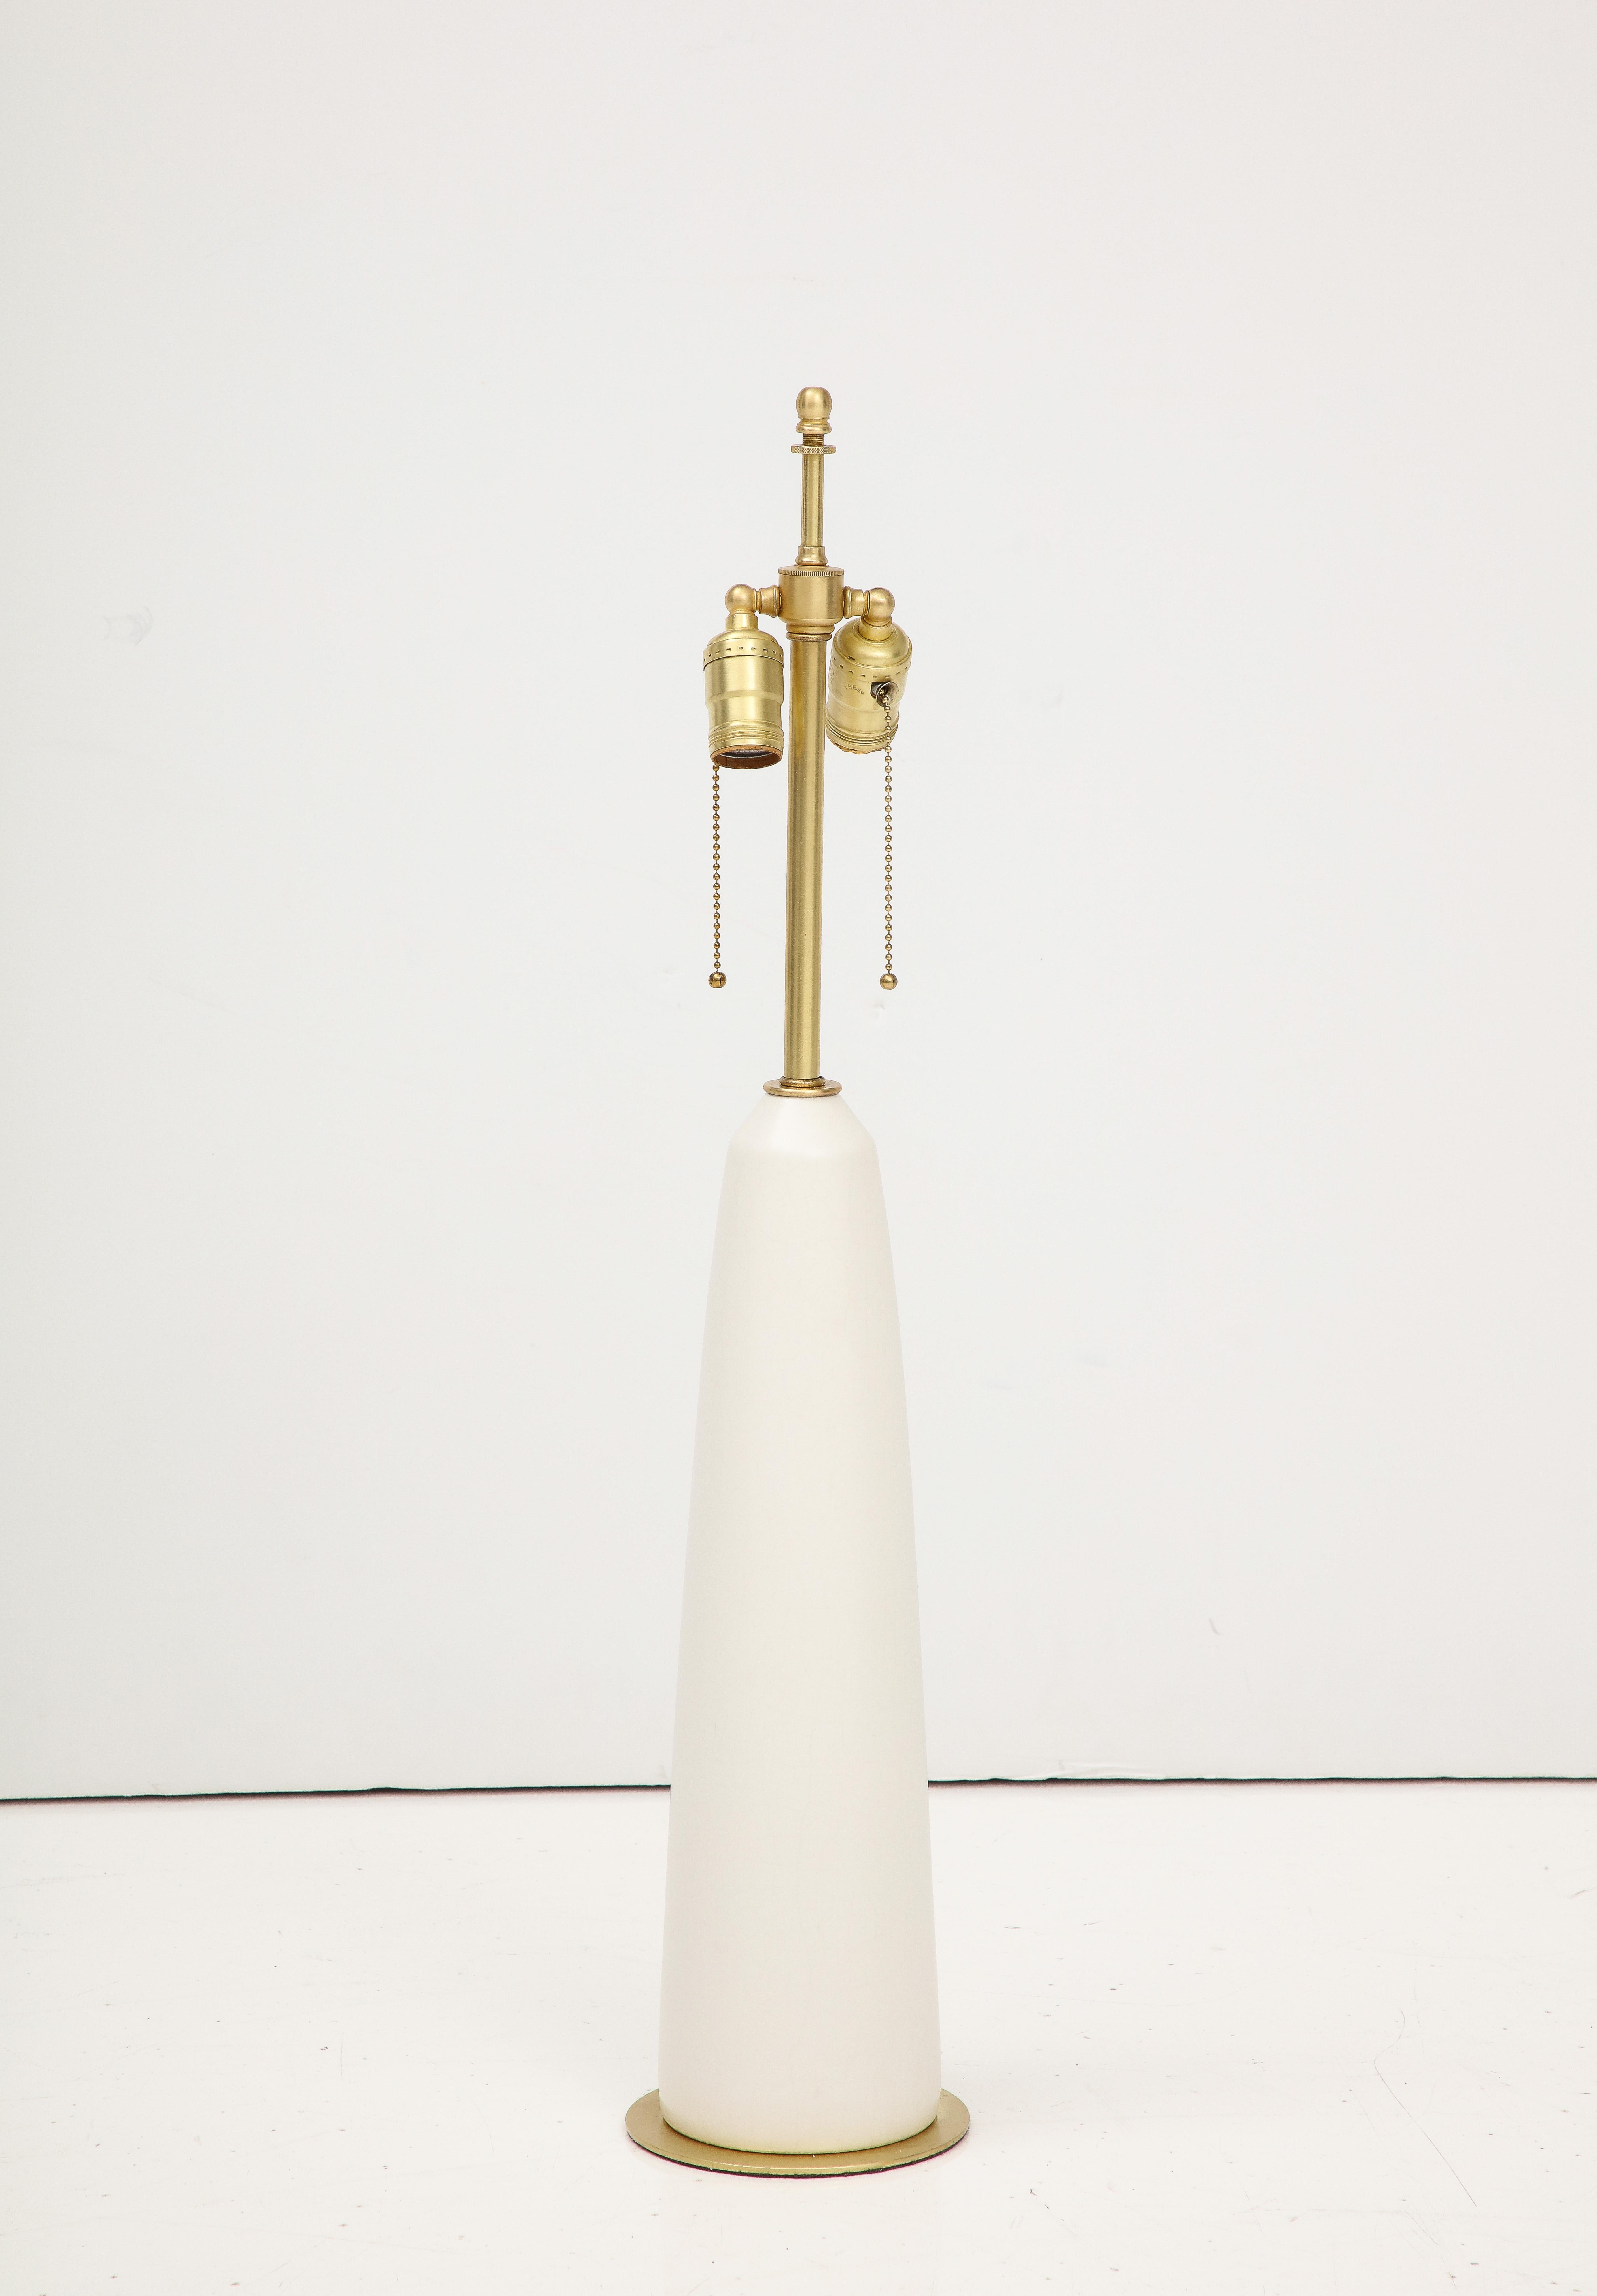 1960s Mid-Century Modern brass and ceramic table lamp by Stewart Ross James, in vintage condition with minor wear and patina due to age and use, newly rewired and ready to use.